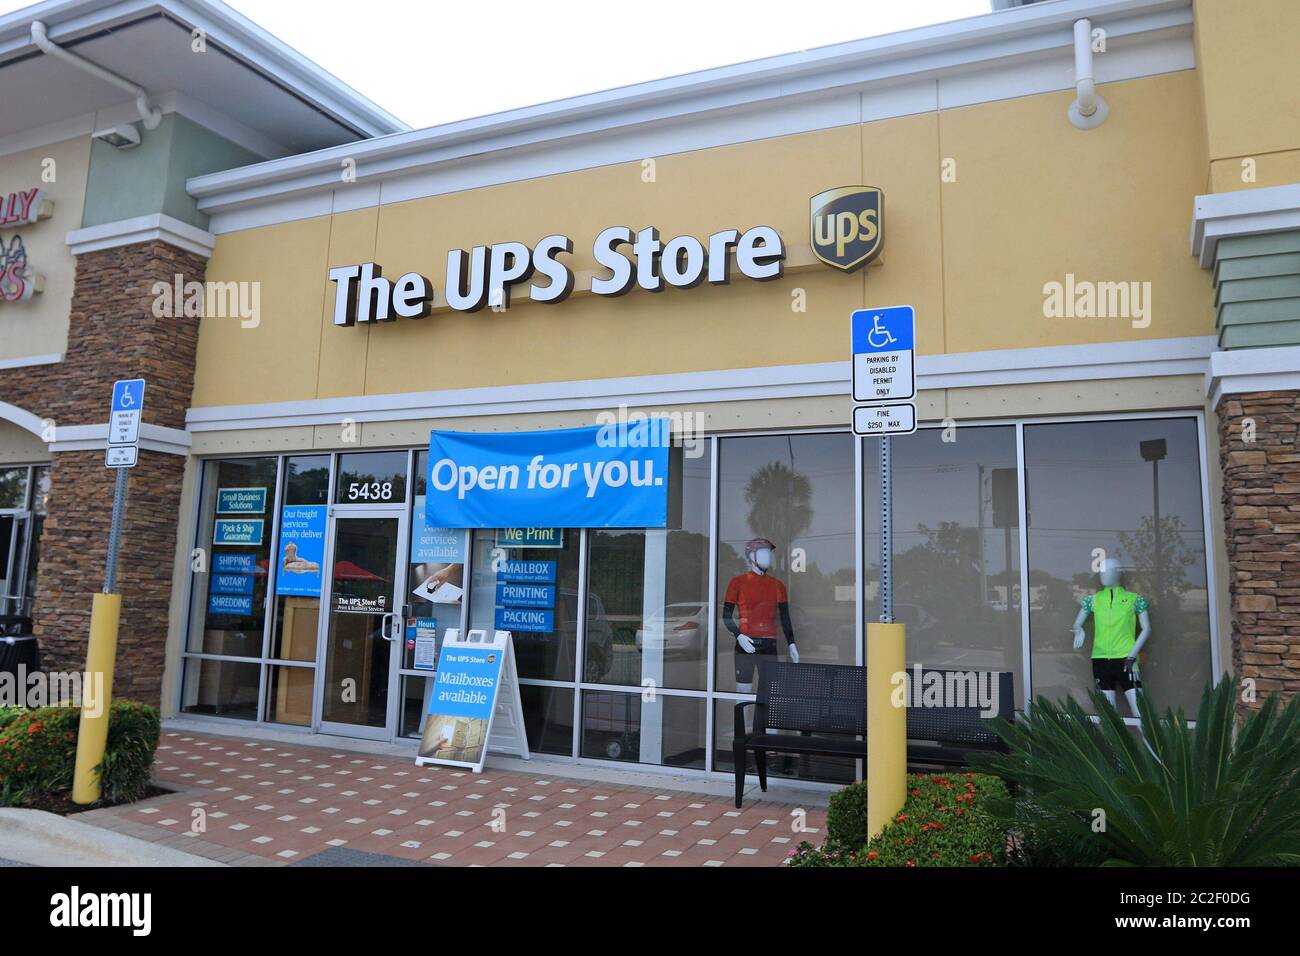 Bradenton, FL, 4/17/2020: View of the front of a UPS store during the coronavirus pandemic. Stock Photo